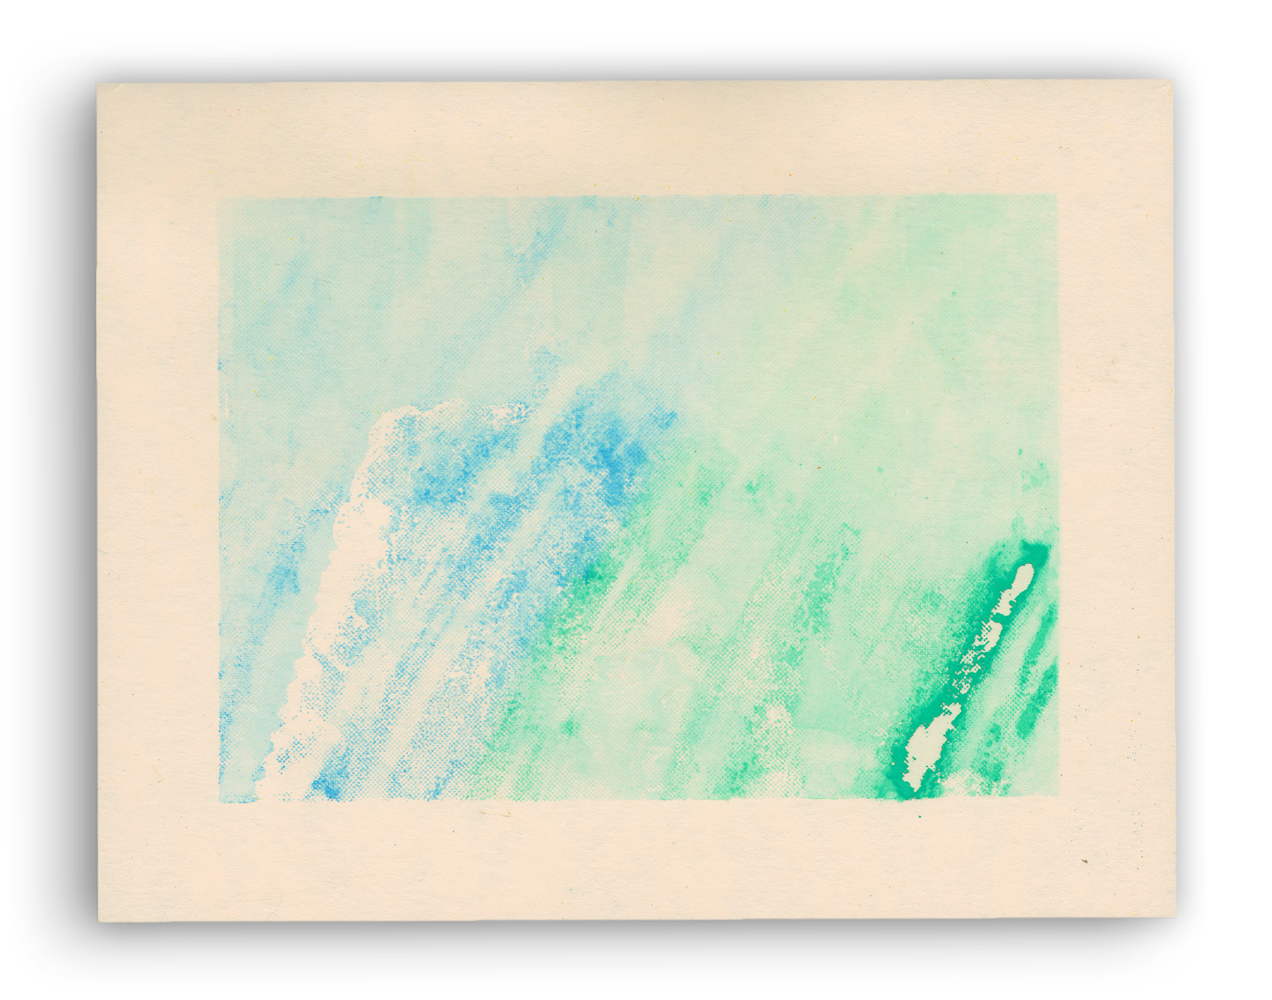 A ghost print from the top row of prints. As the ghost prints progress, the colors bleed into each other more and gradually fill the negative space, before getting fainter again.